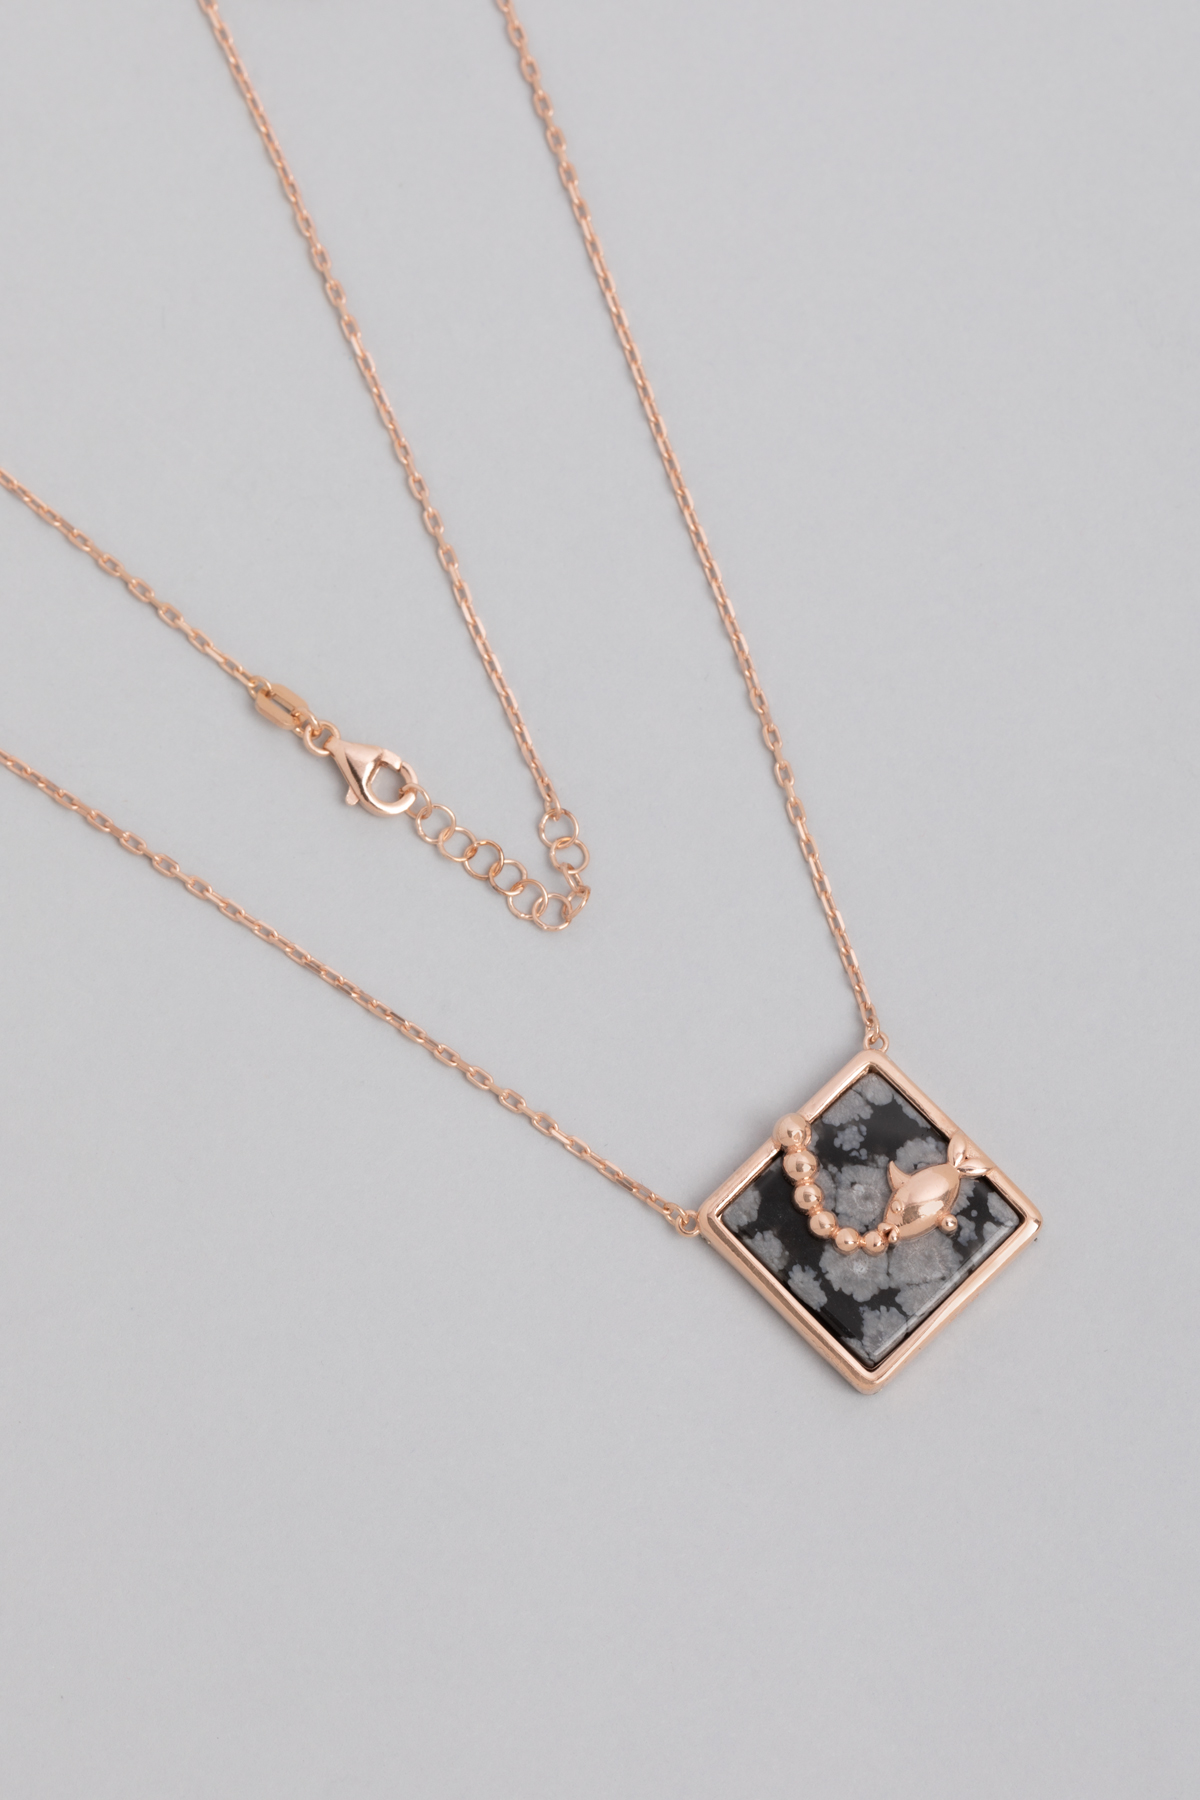 18 Karat Rose Gold Plated Silver Necklace with Dalmatian Stone 